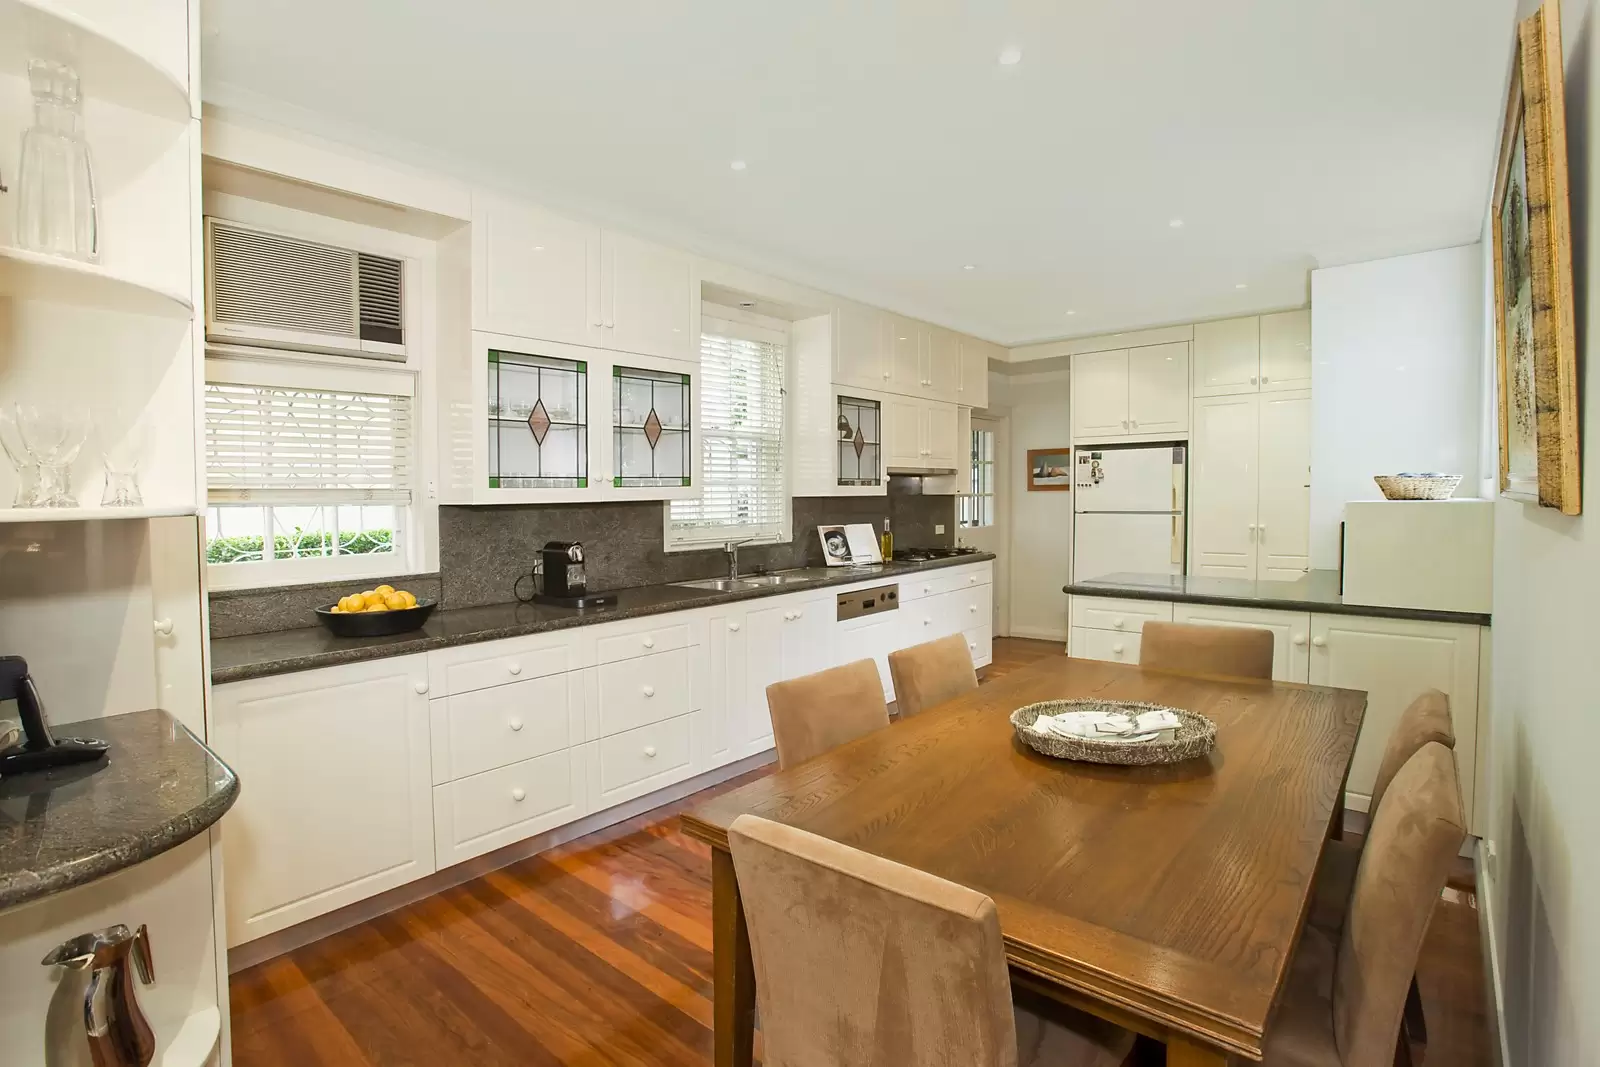 Photo #12: 5 Wallaroy Crescent, Woollahra - Sold by Sydney Sotheby's International Realty